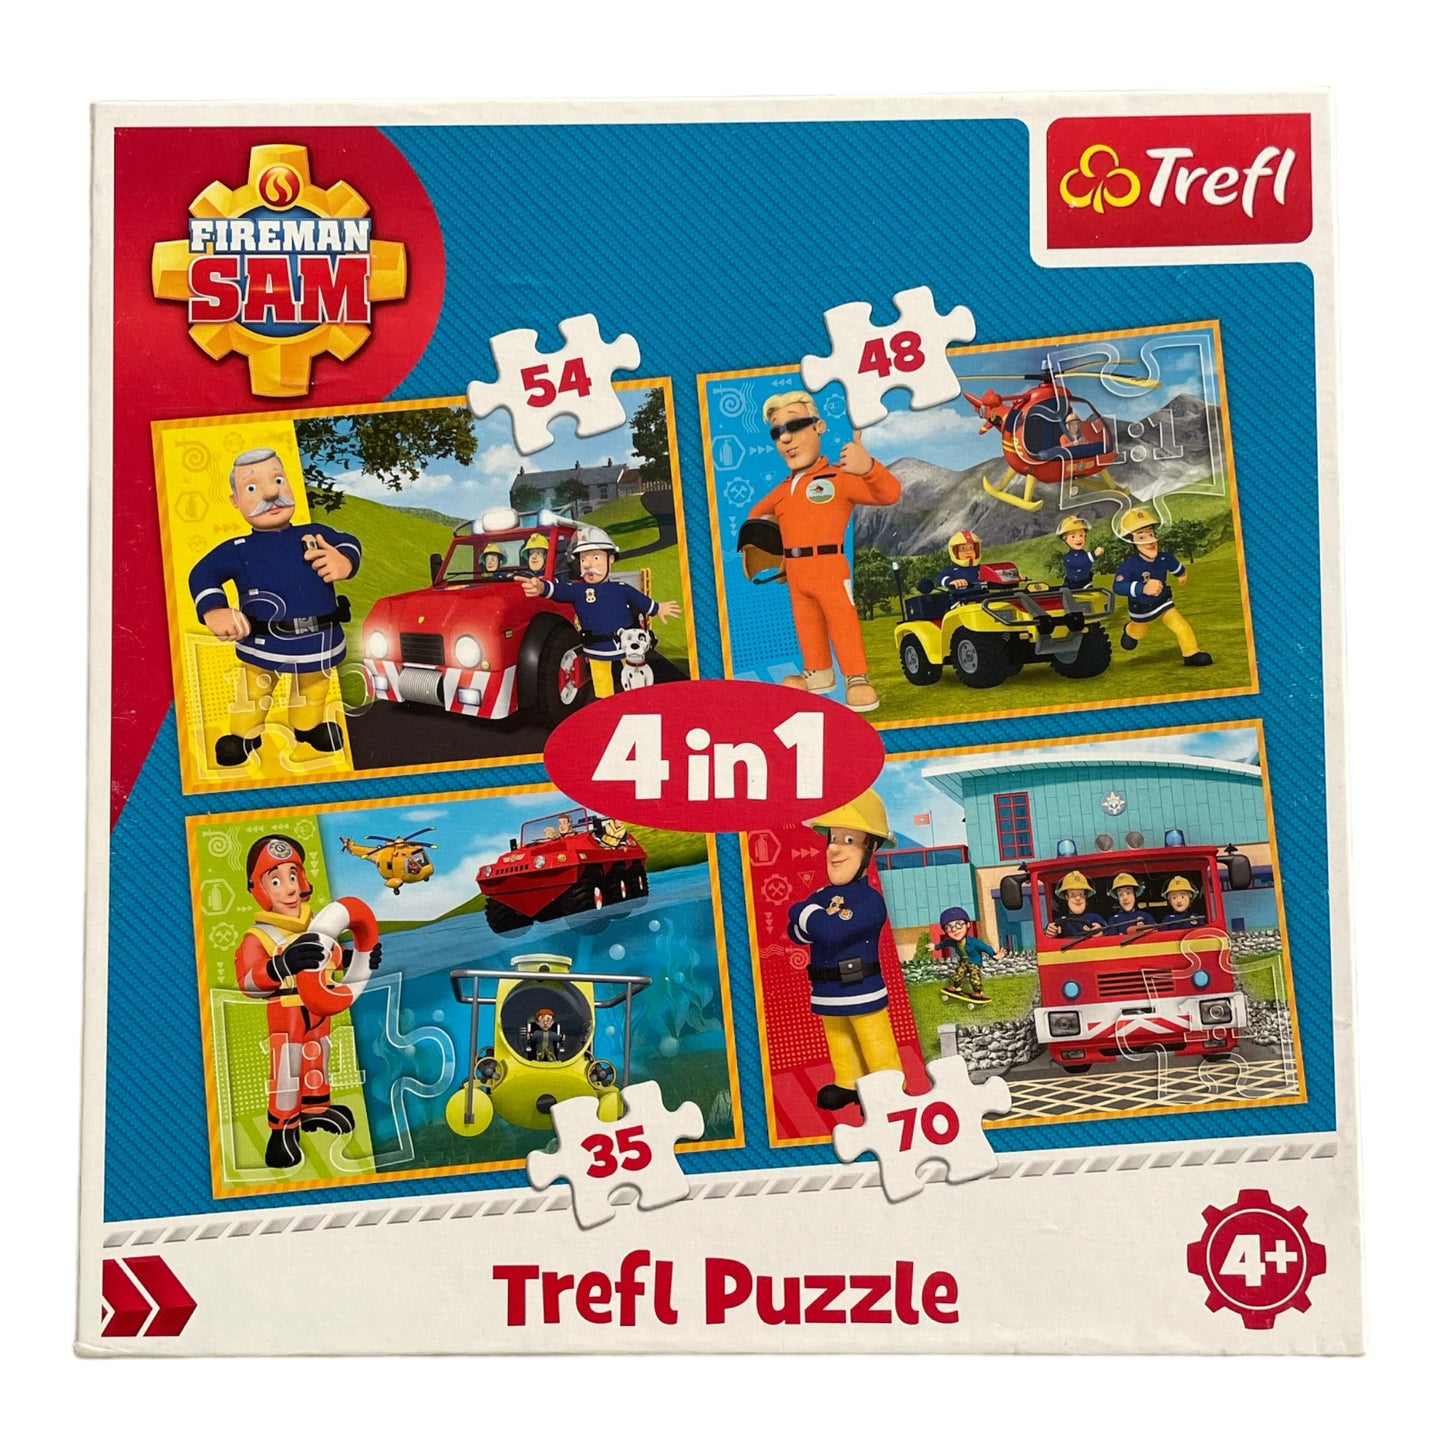 Fireman Sam - 4in1 Puzzle